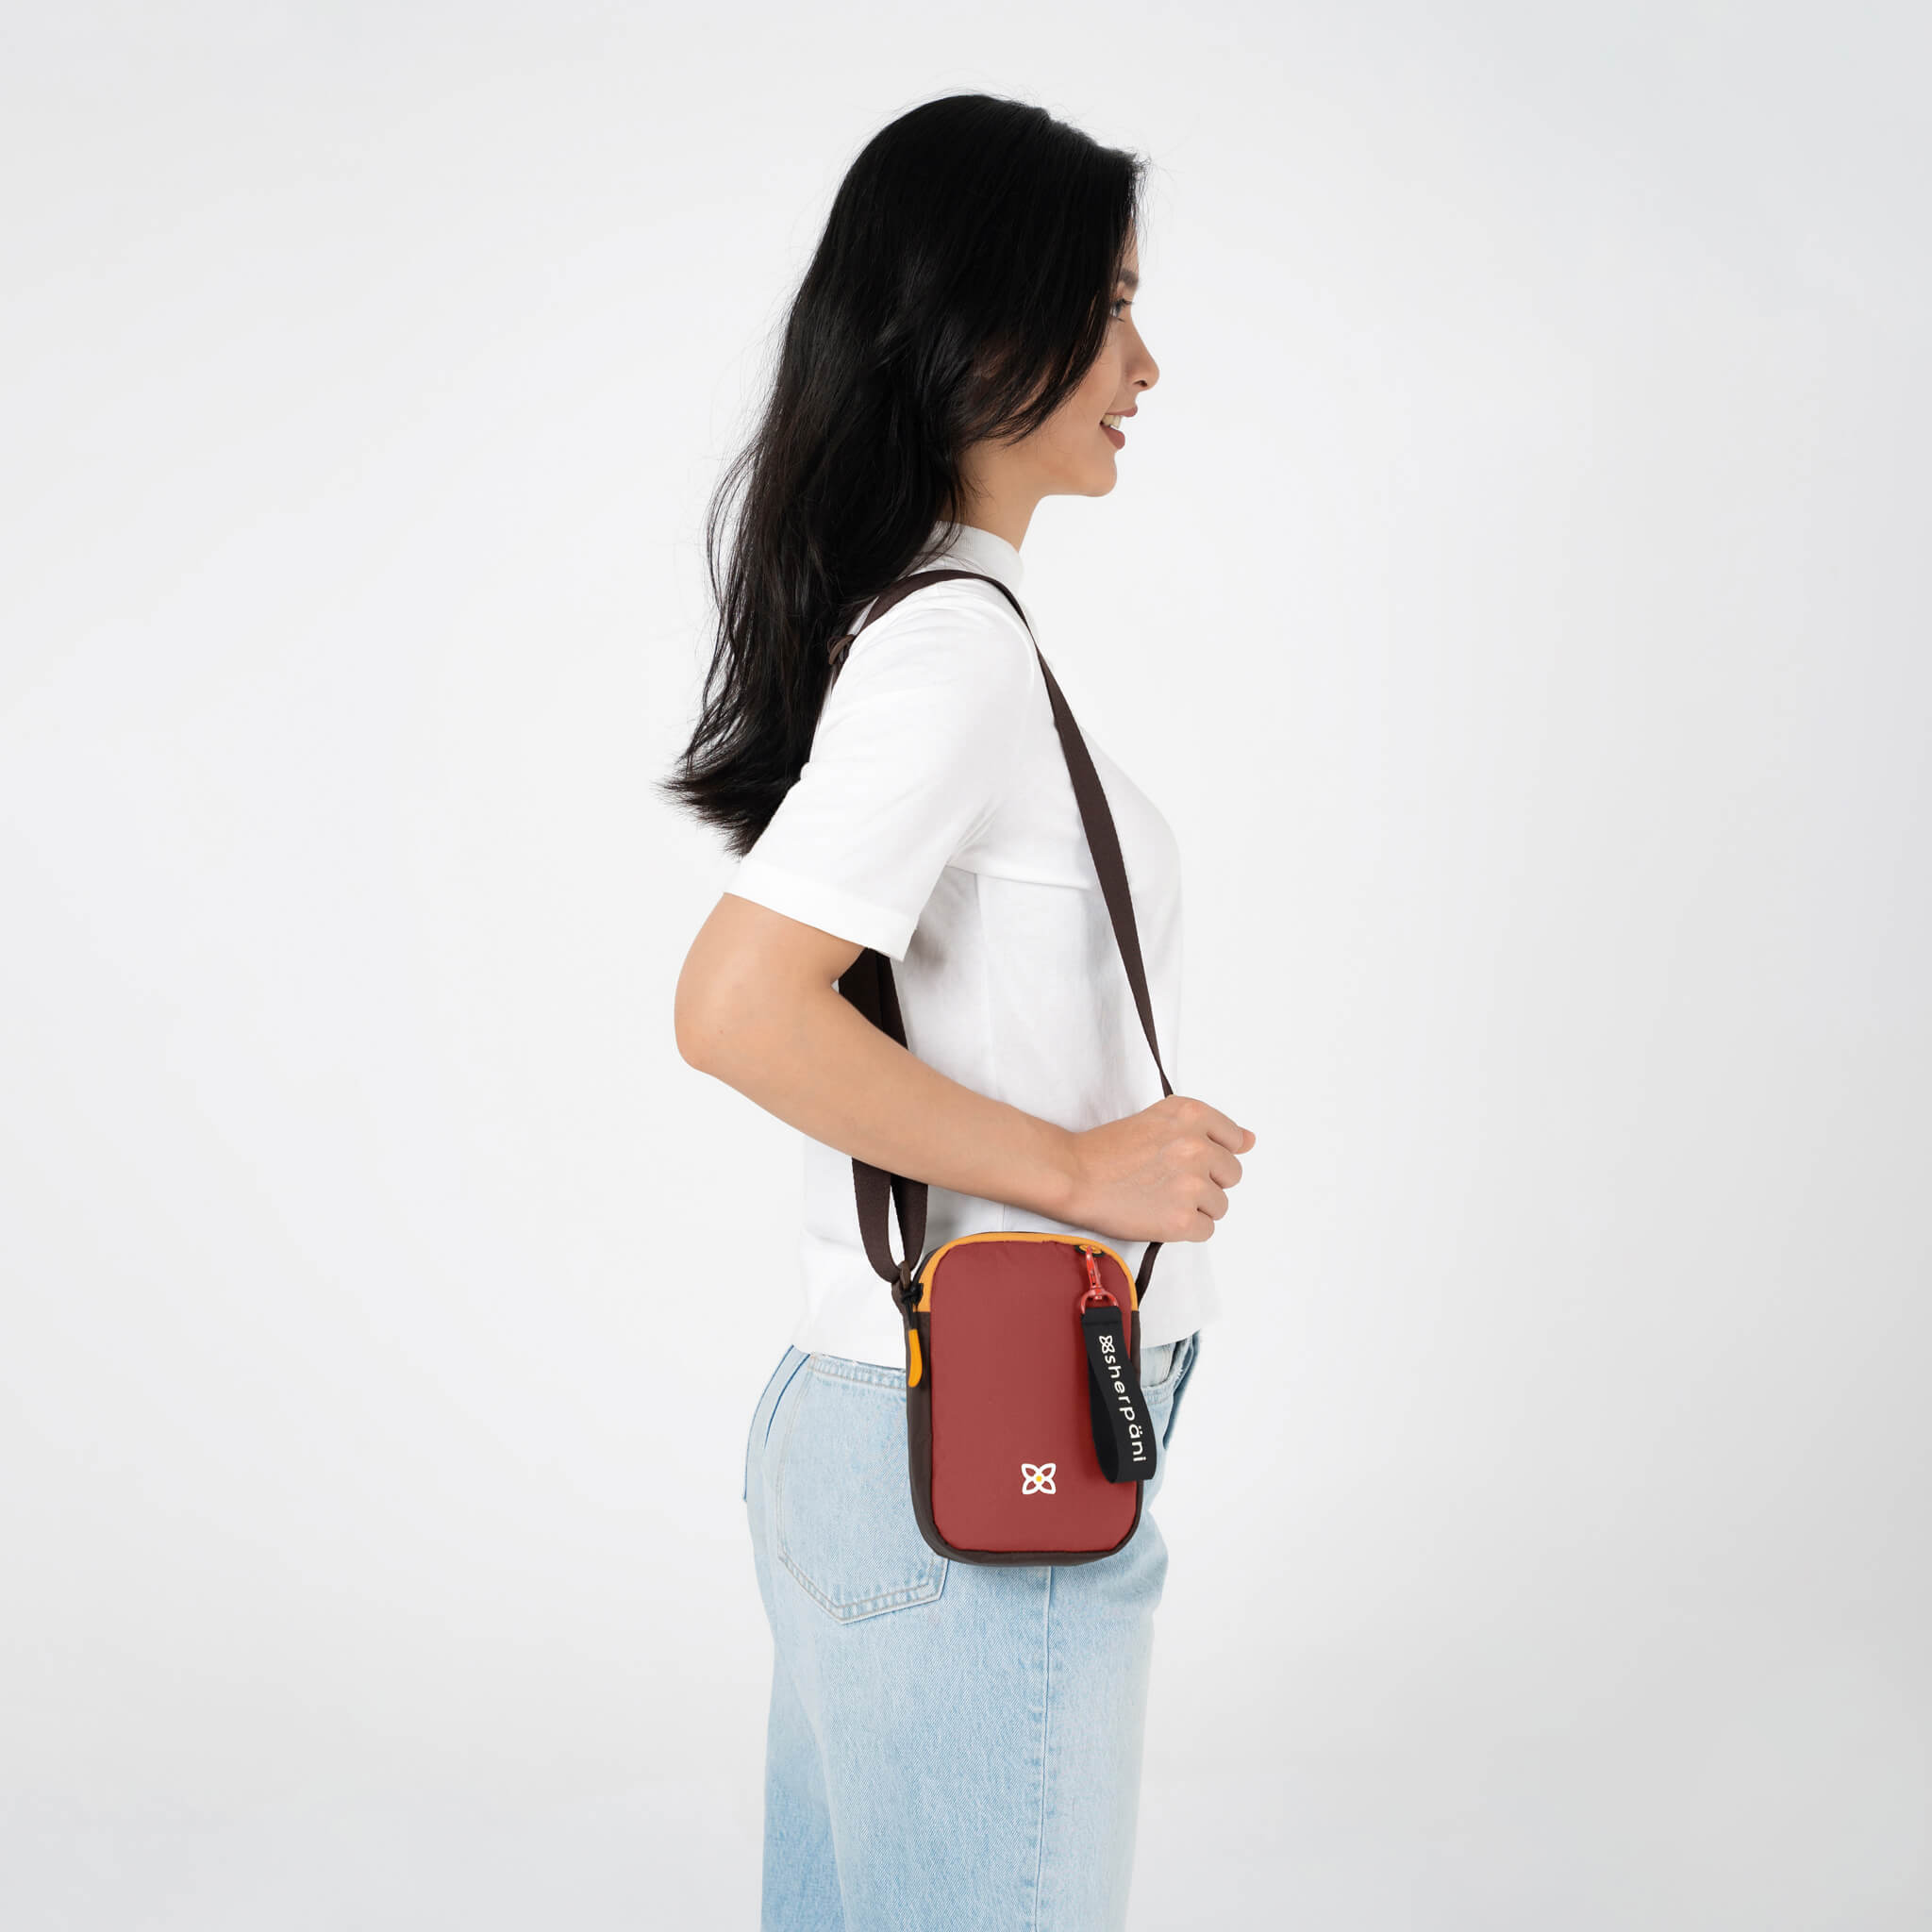 A model wearing Sherpani RFID purse, the Rogue in Cider.